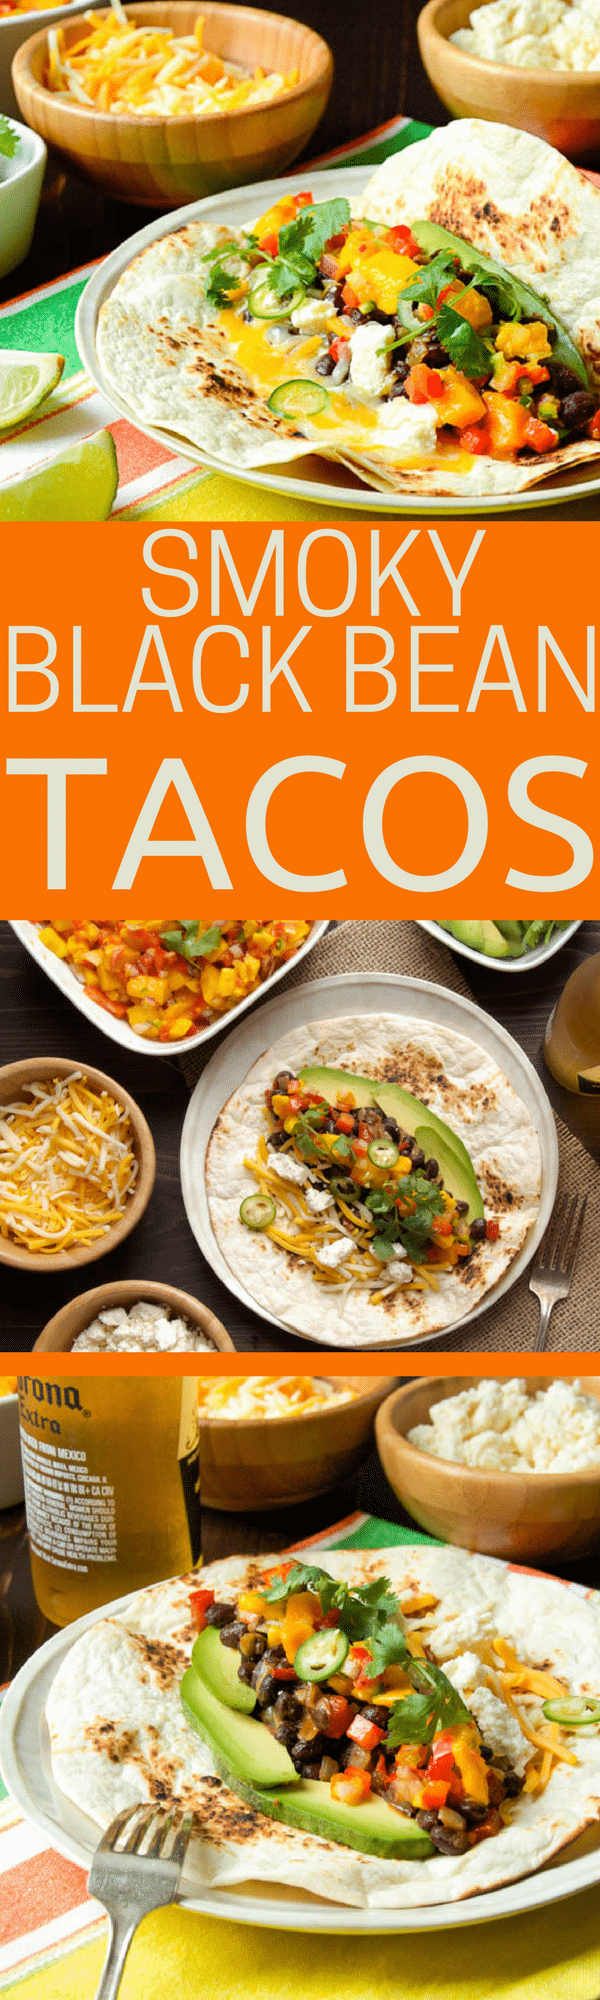 This easy budget-friendly, vegetarian taco recipe is ready in minutes and is so healthy and satisfying. Smoky Black Bean Tacos are great with jarred sauce and a better with homemade mango salsa. Best bean tacos ever!#tacos #vegetariantaco